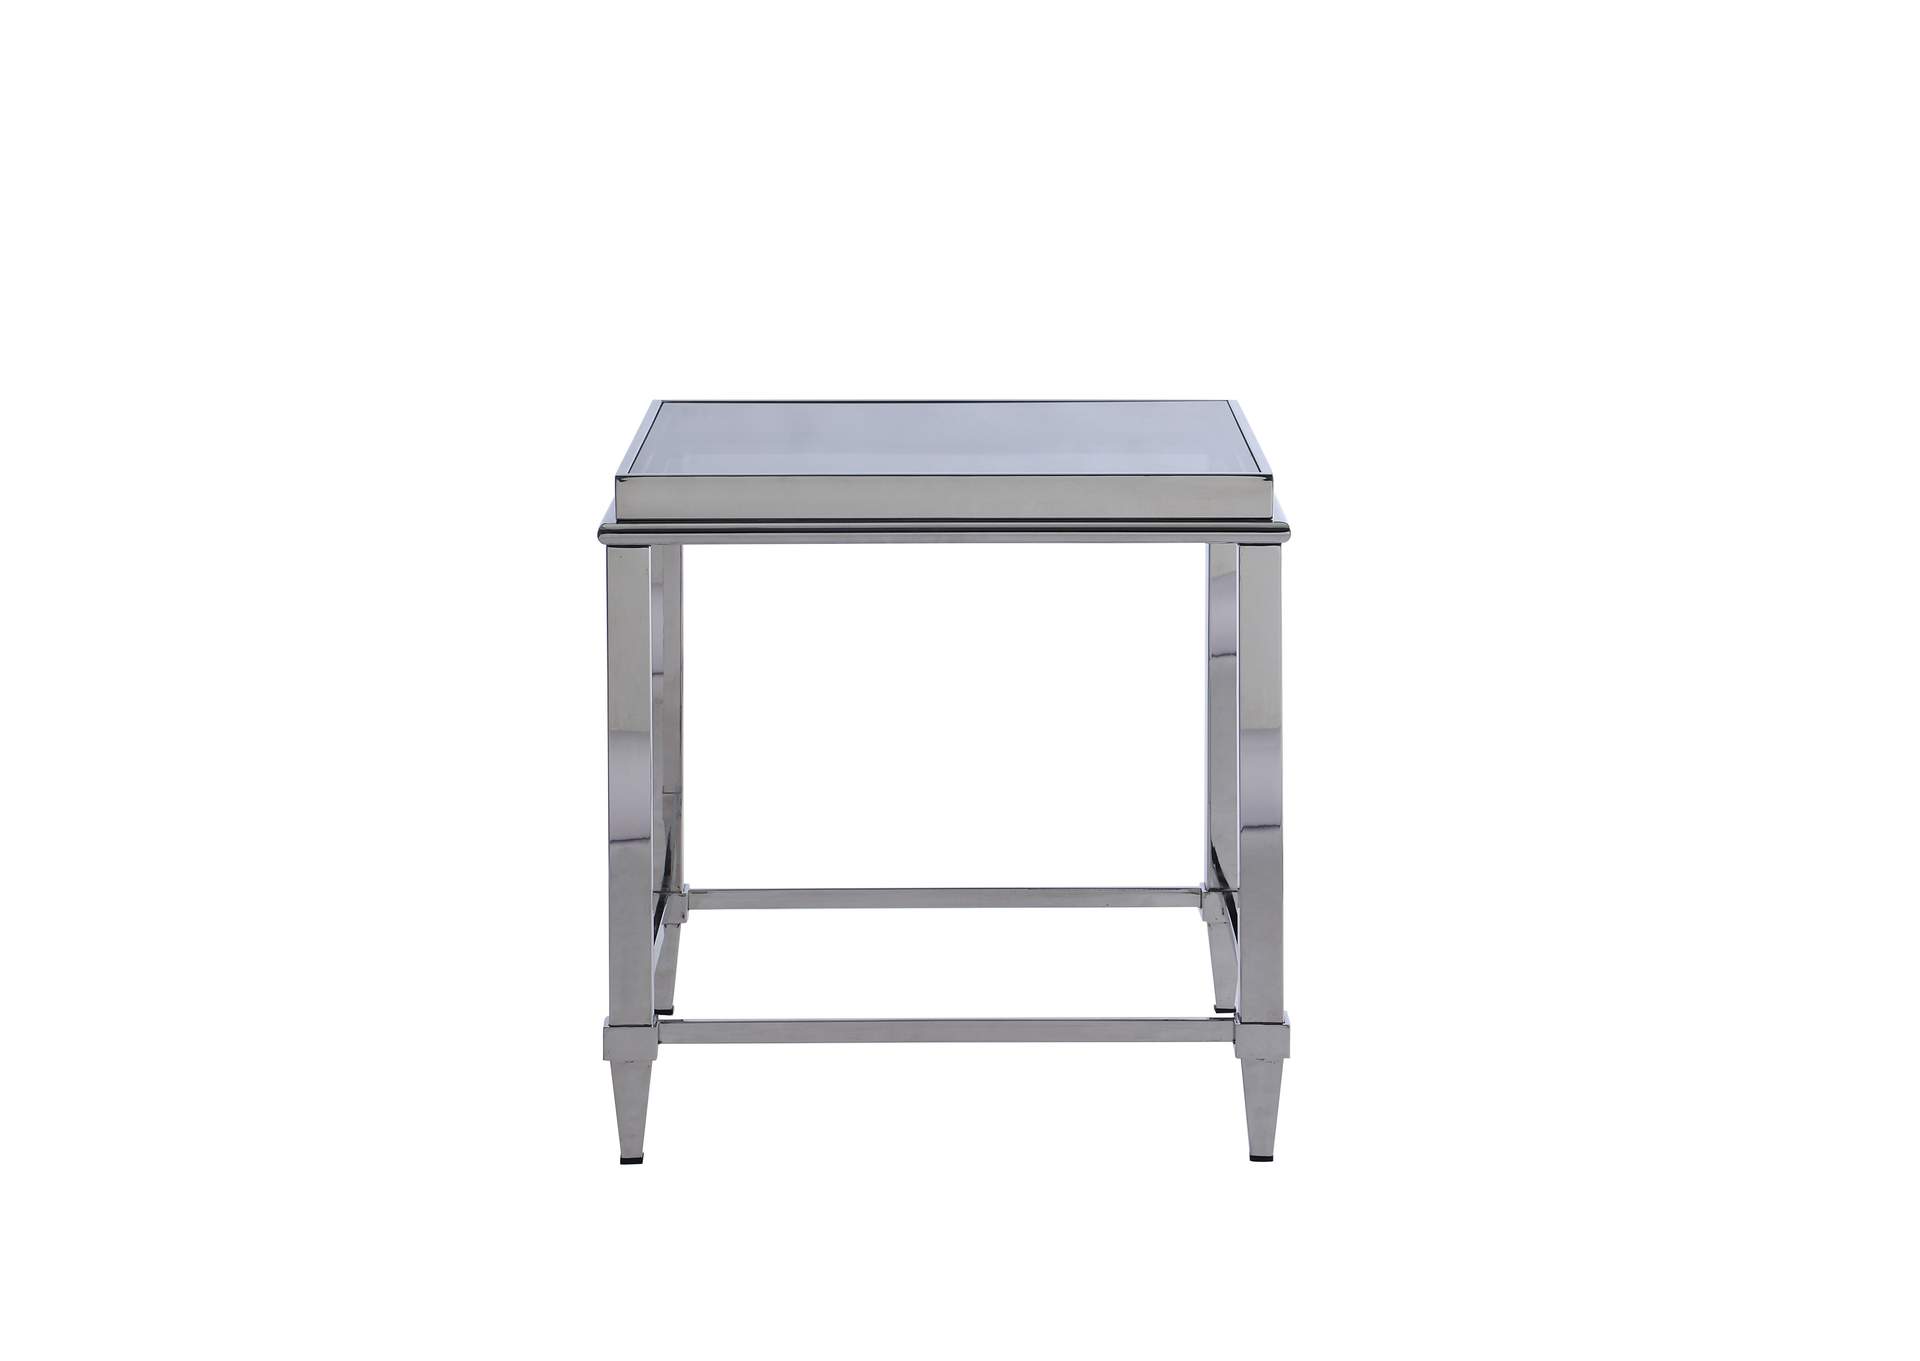 Polished SS Contemporary Lamp Table w/ Glass Top & Gray Trim,Chintaly Imports